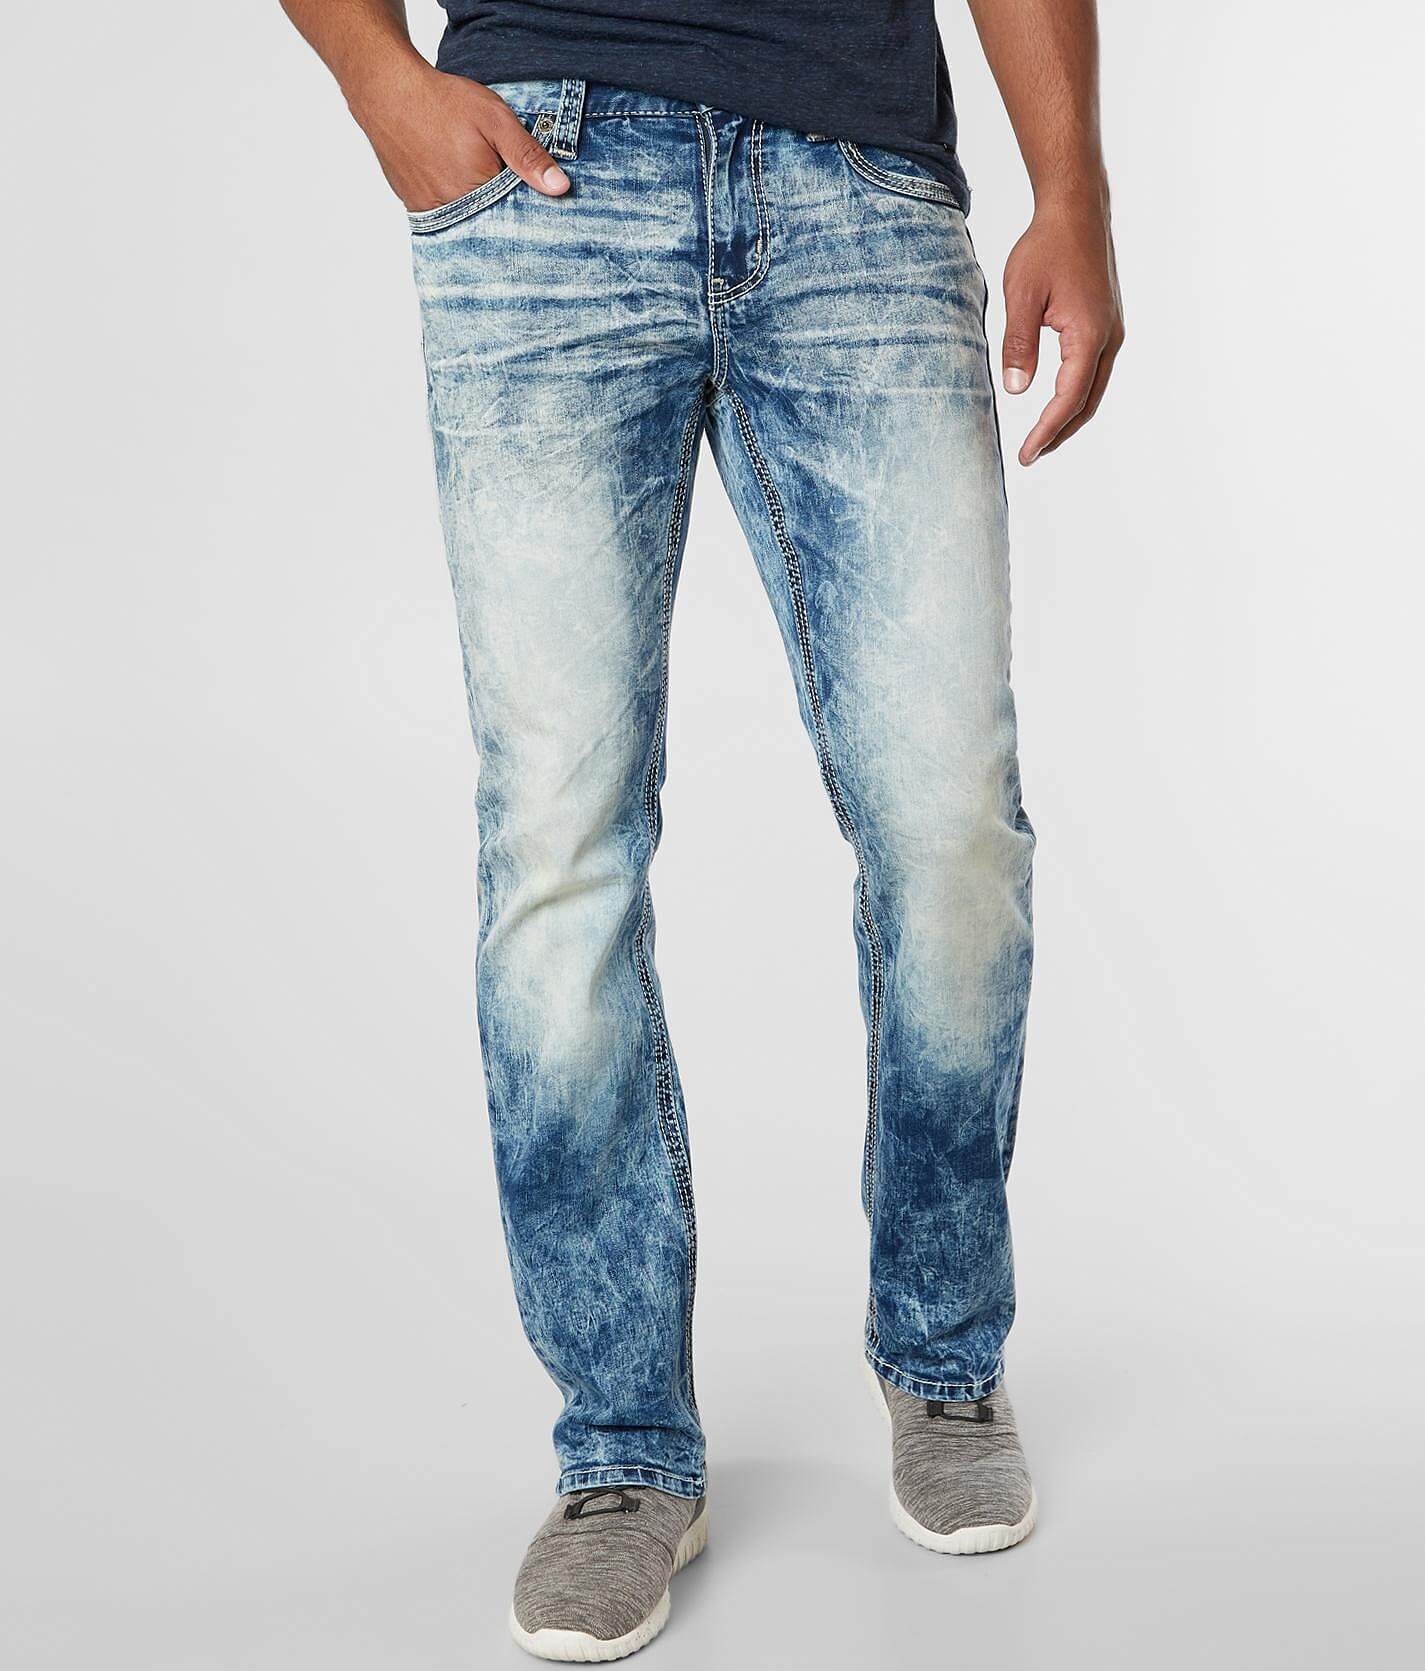 buckle clearance jeans